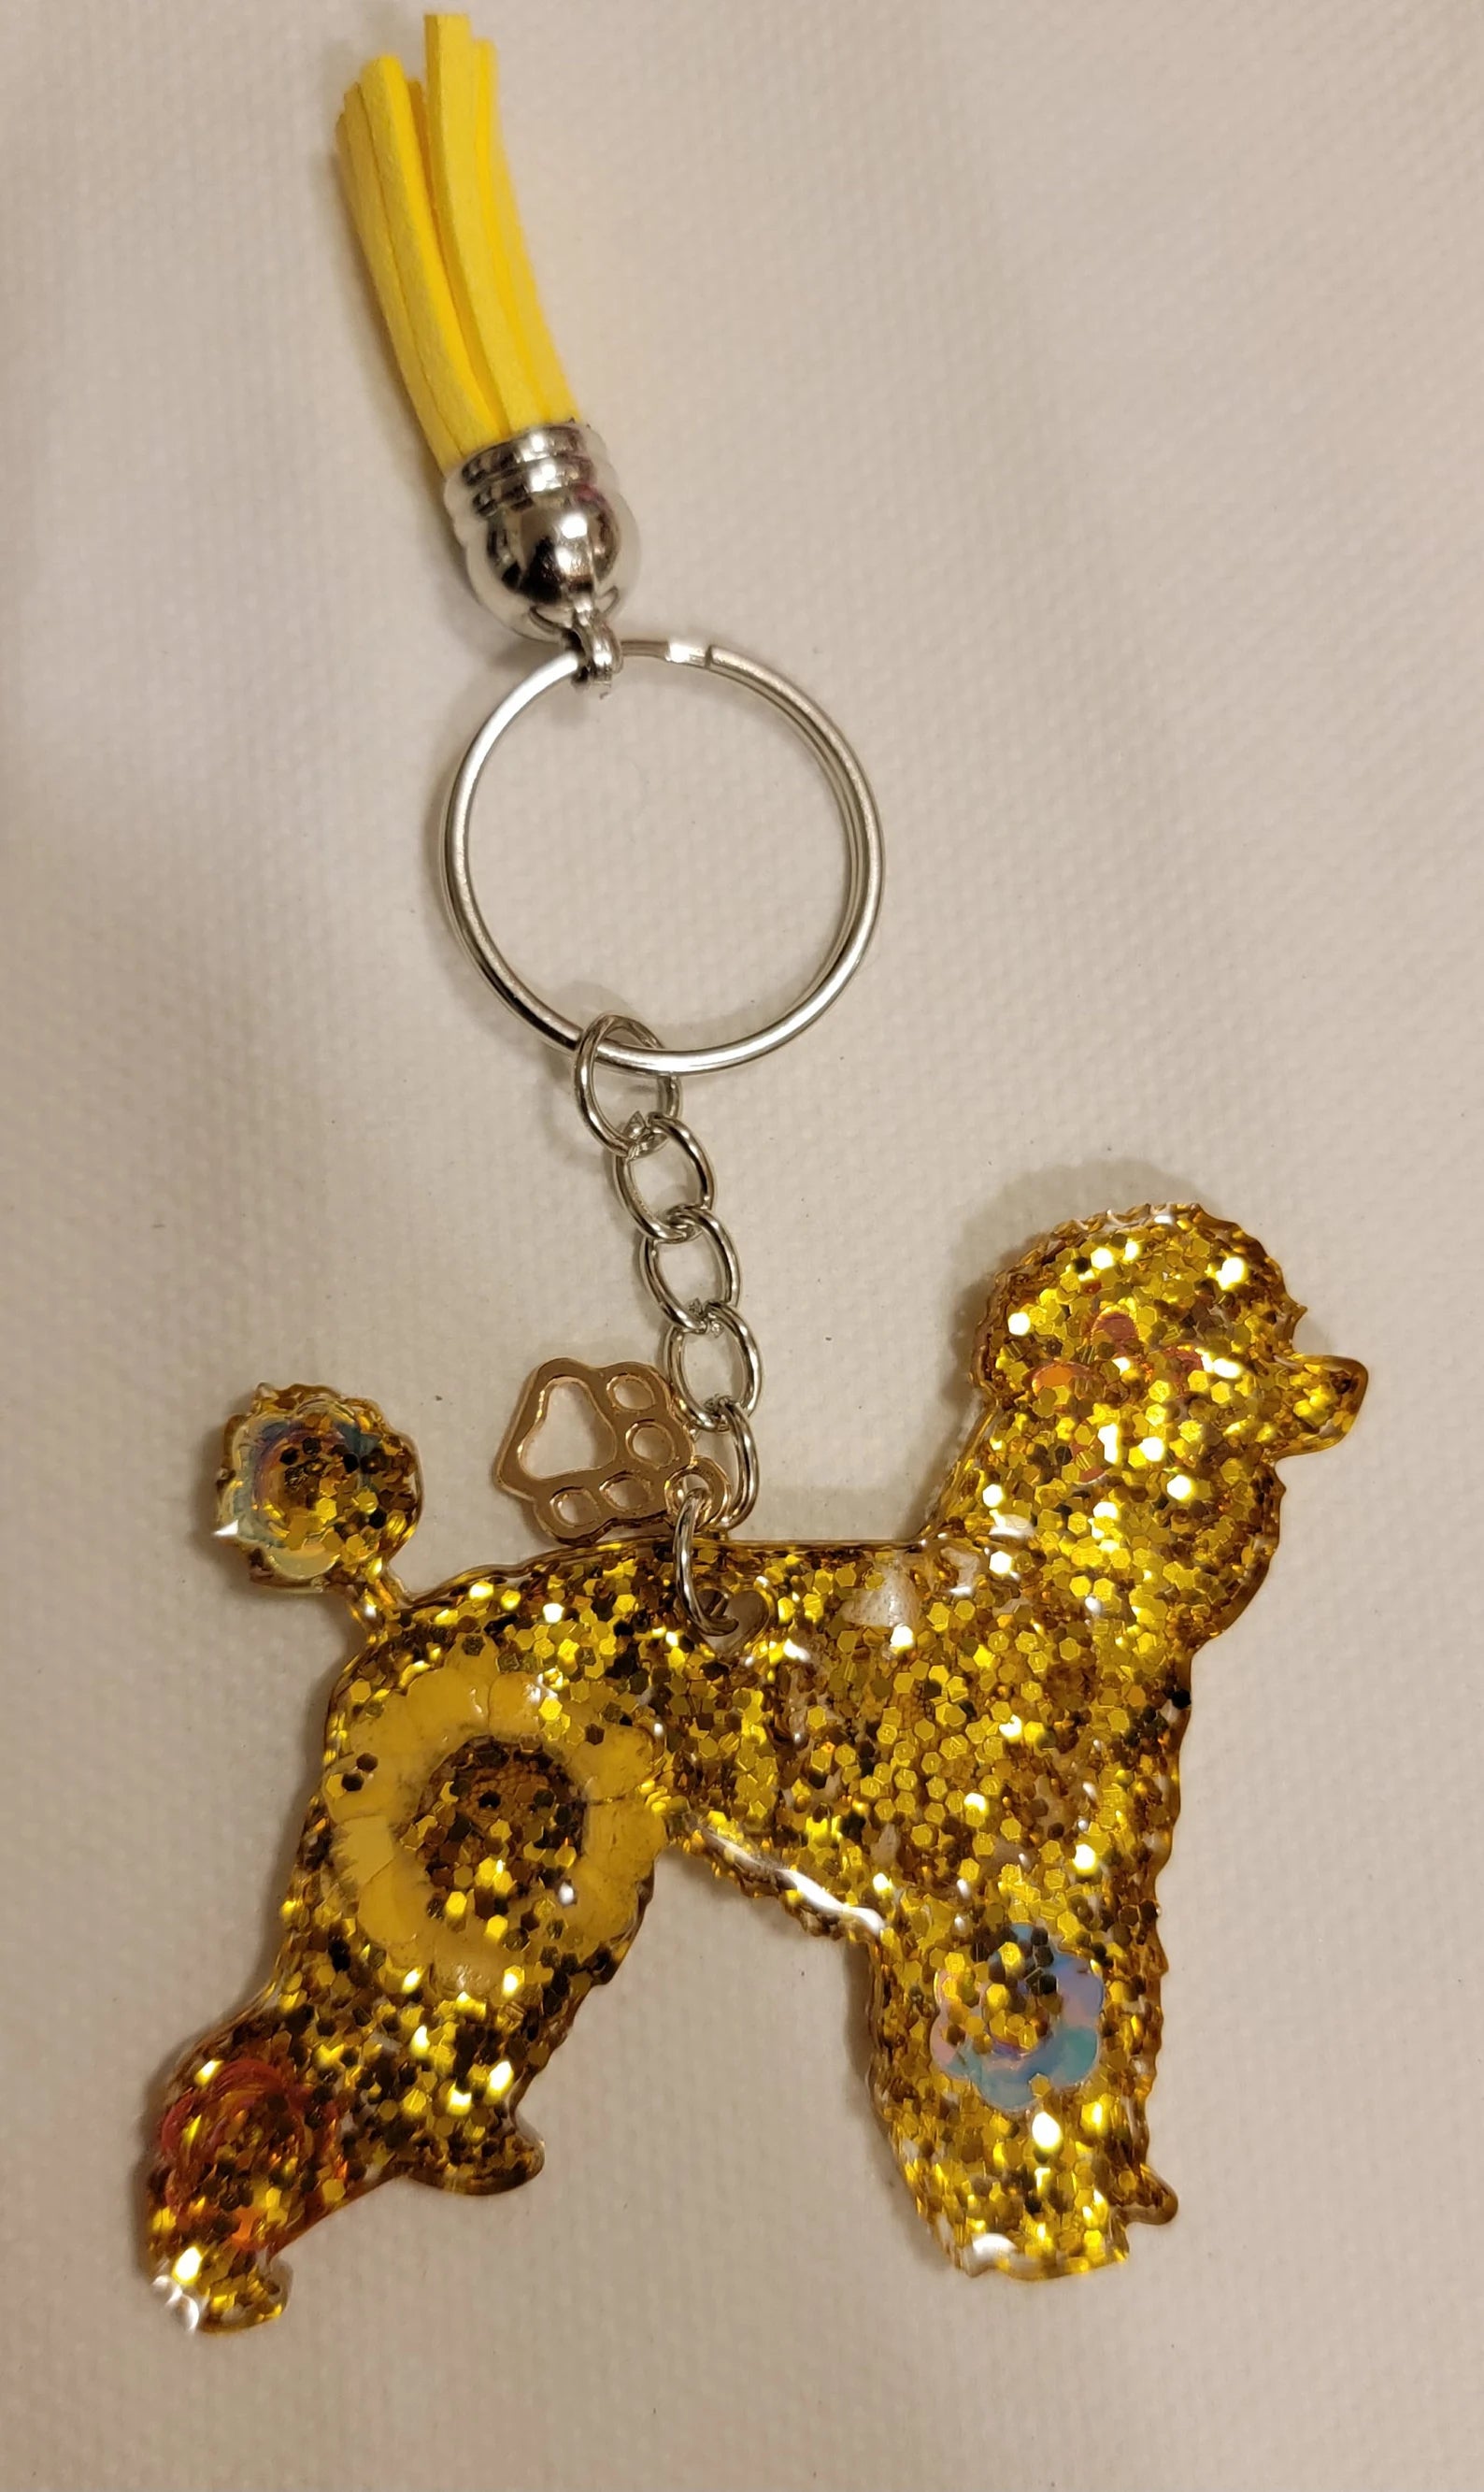 Golden handmade poodle keychain ! Gift keychain poodle lovers ! Resin flowers keychain